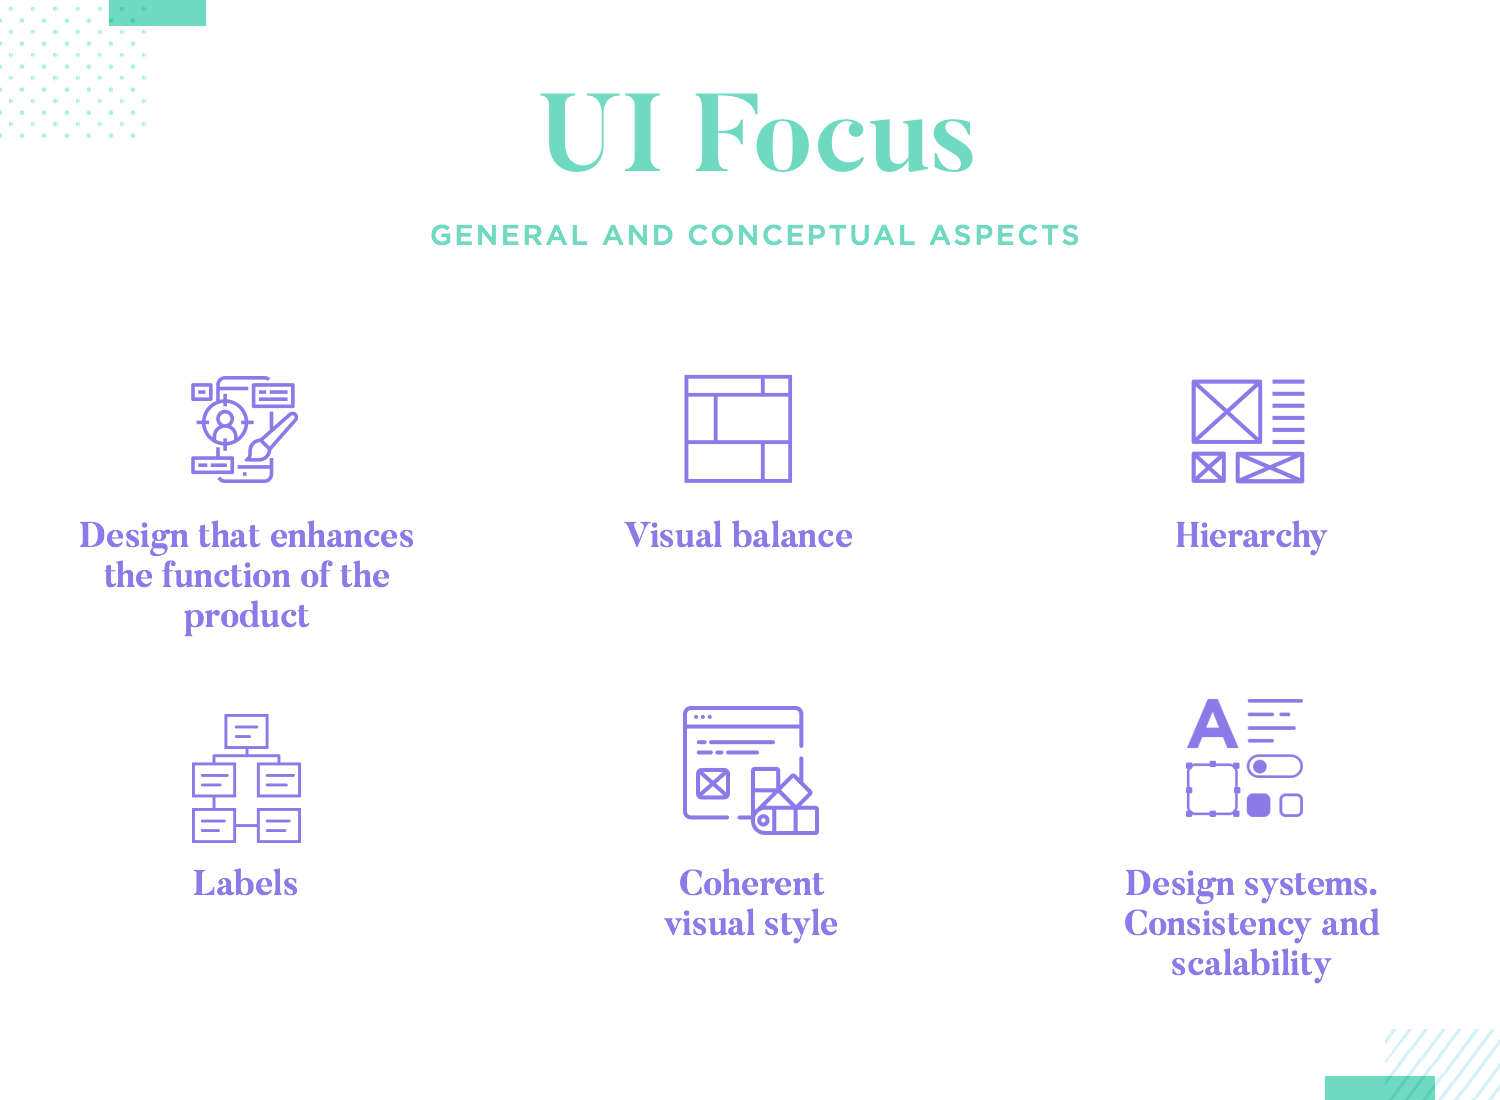 list of tangible factors that UI design focuses on